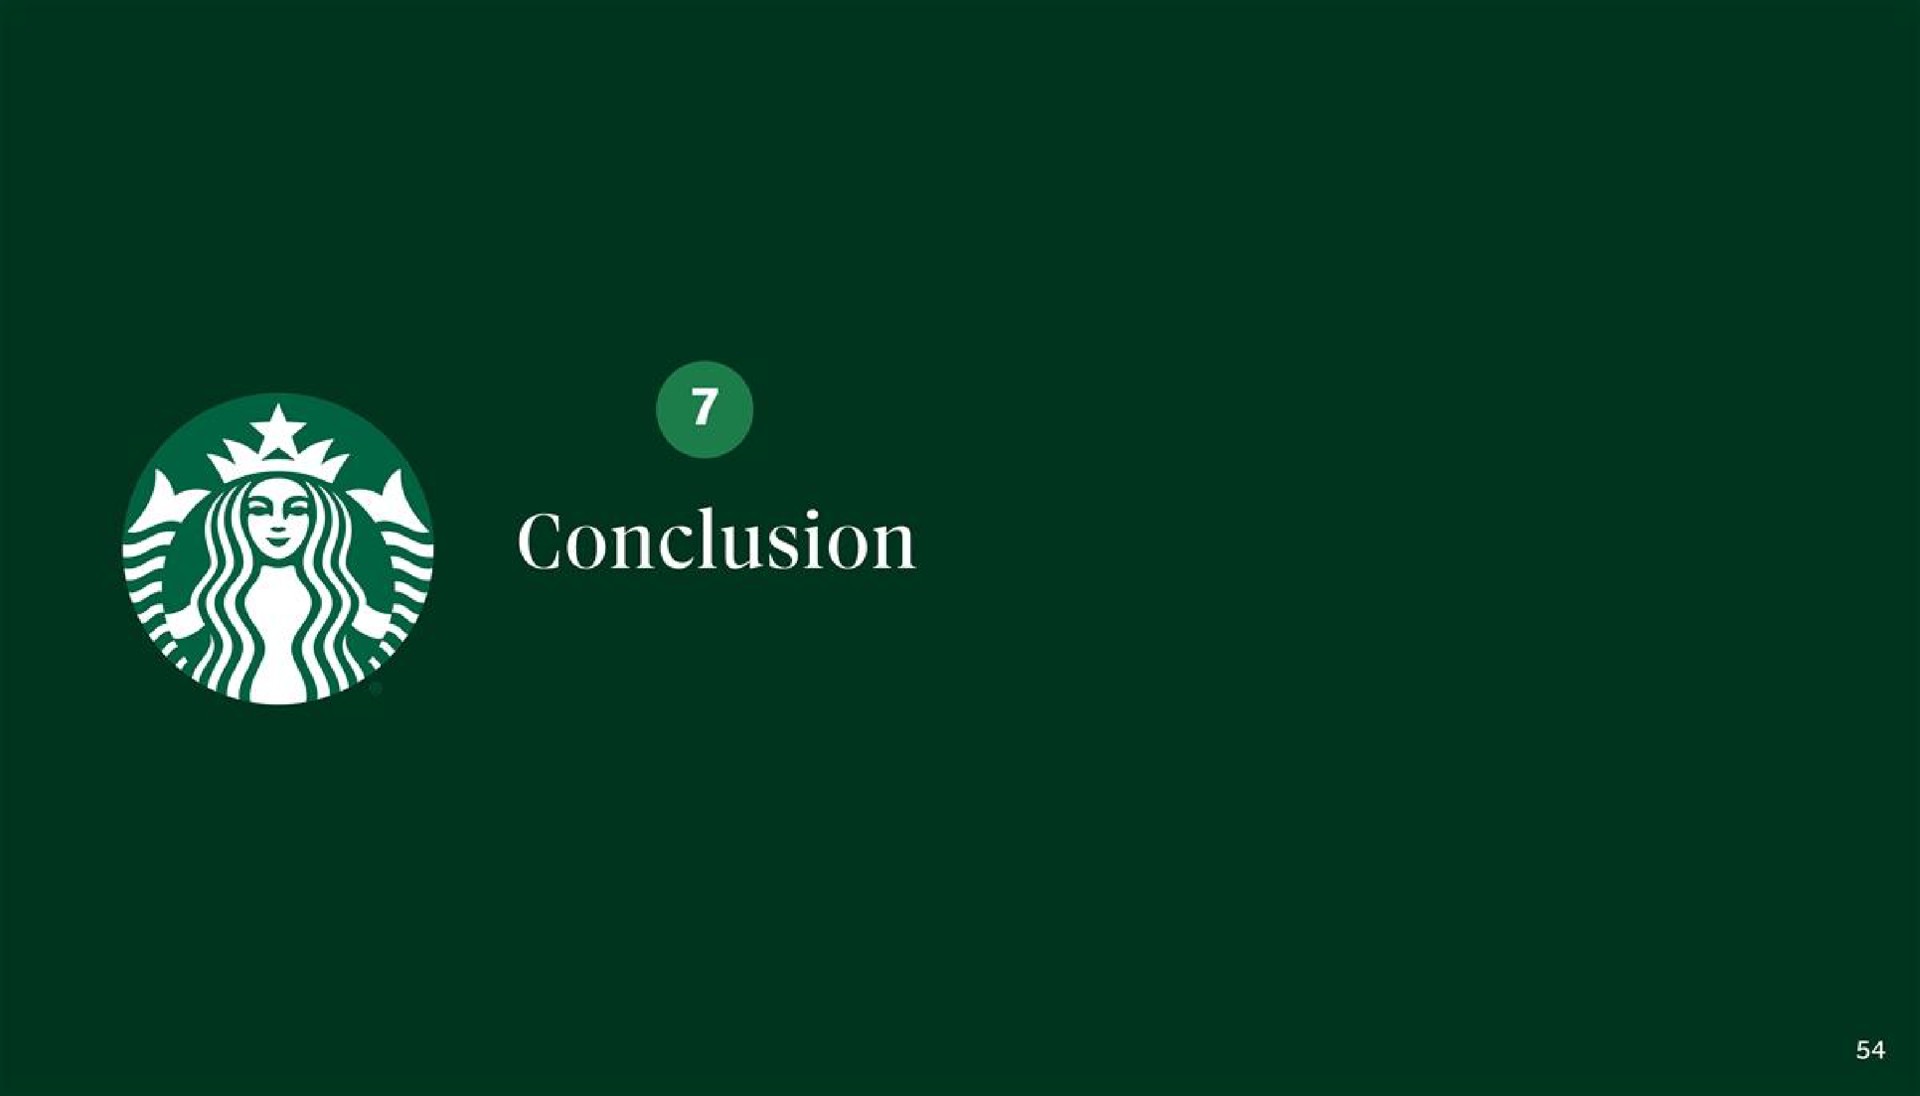 mes conclusion as is | Starbucks